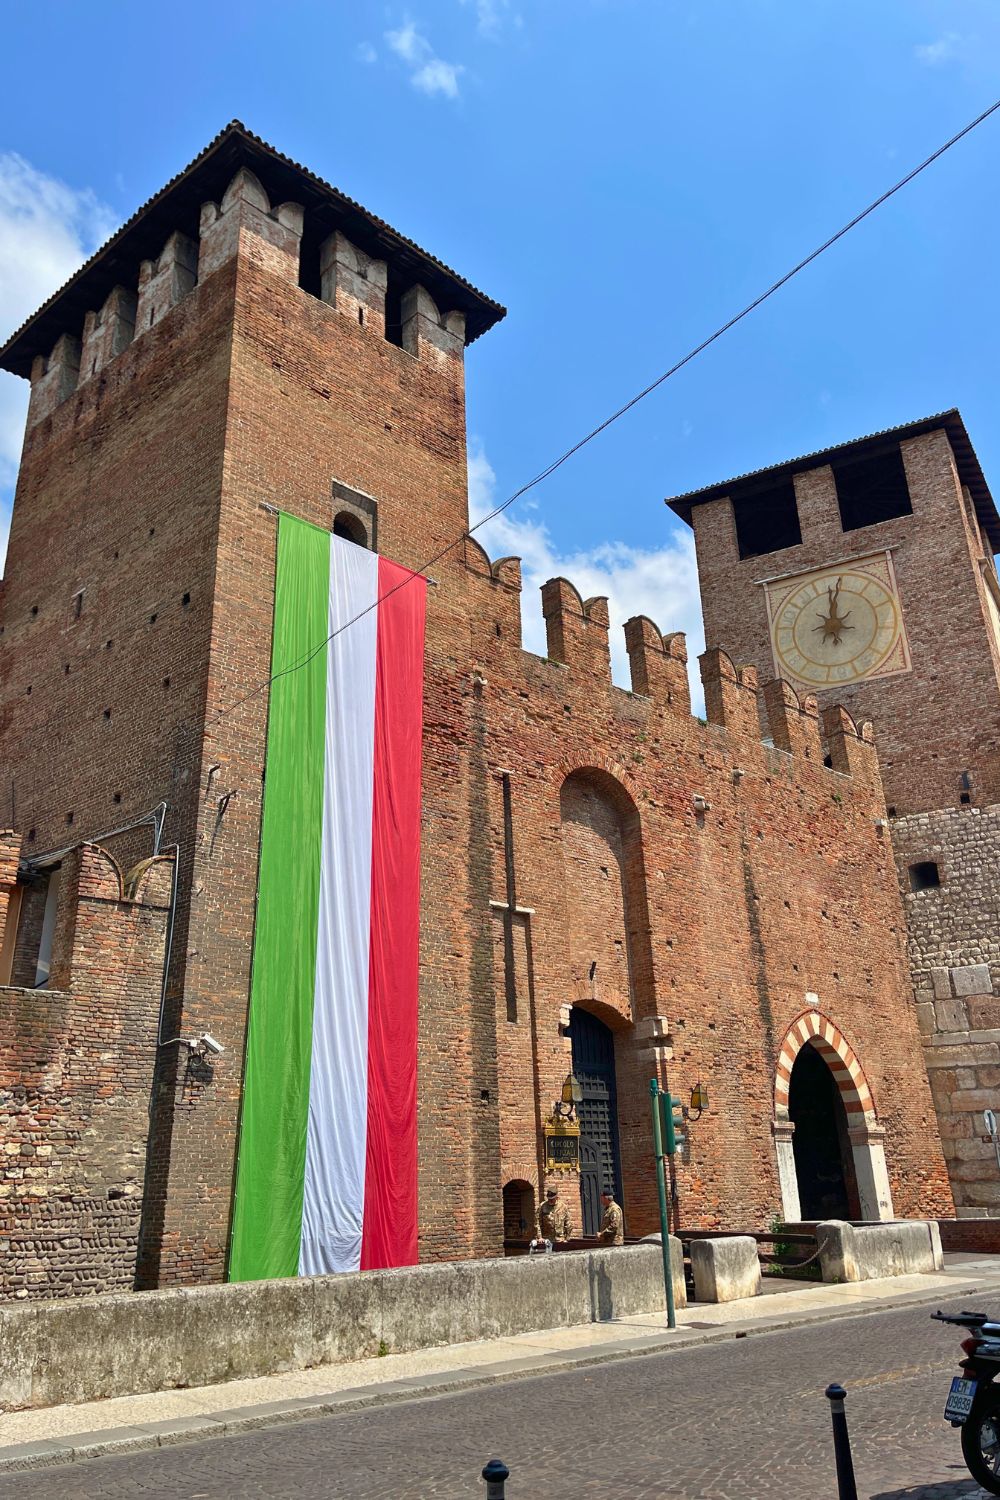 A historic brick building in Verona with a large Italian flag hanging vertically from the top. The building features crenellated battlements and a tower with a large clock face, set against a clear blue sky.